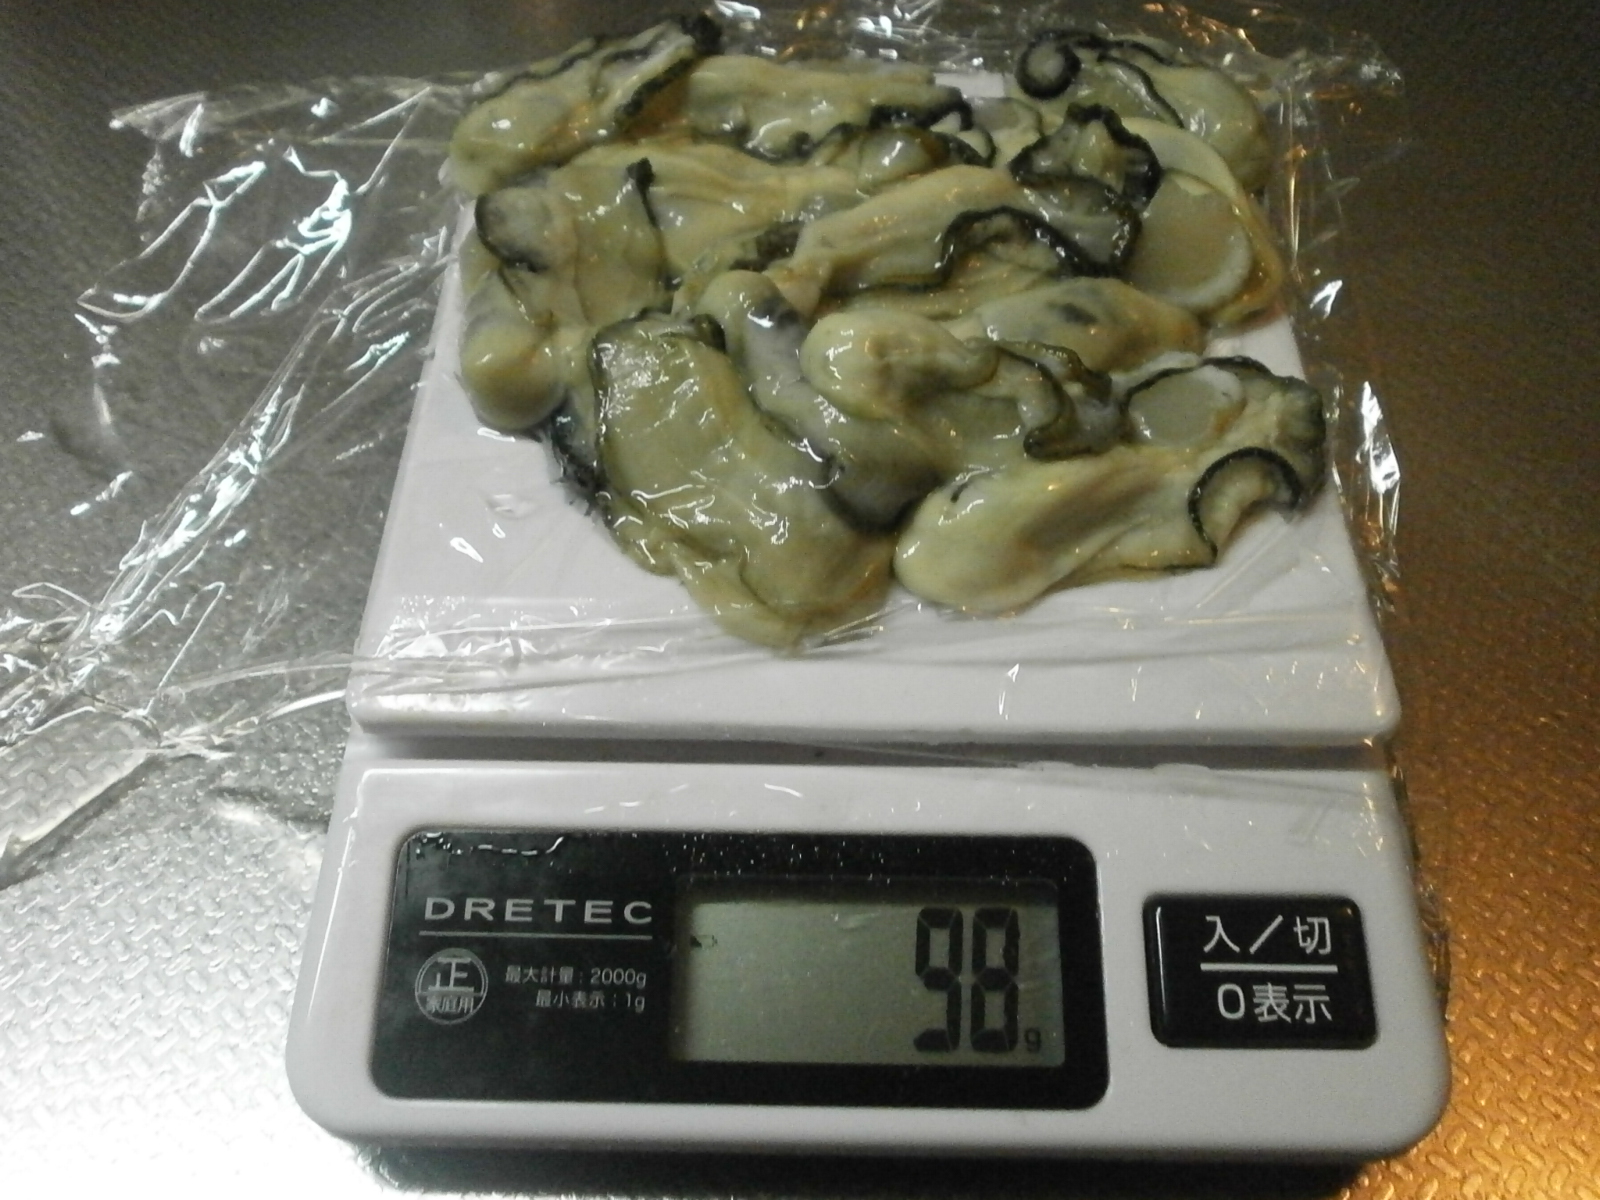 Oysters (g/49 98 / g 13 g)